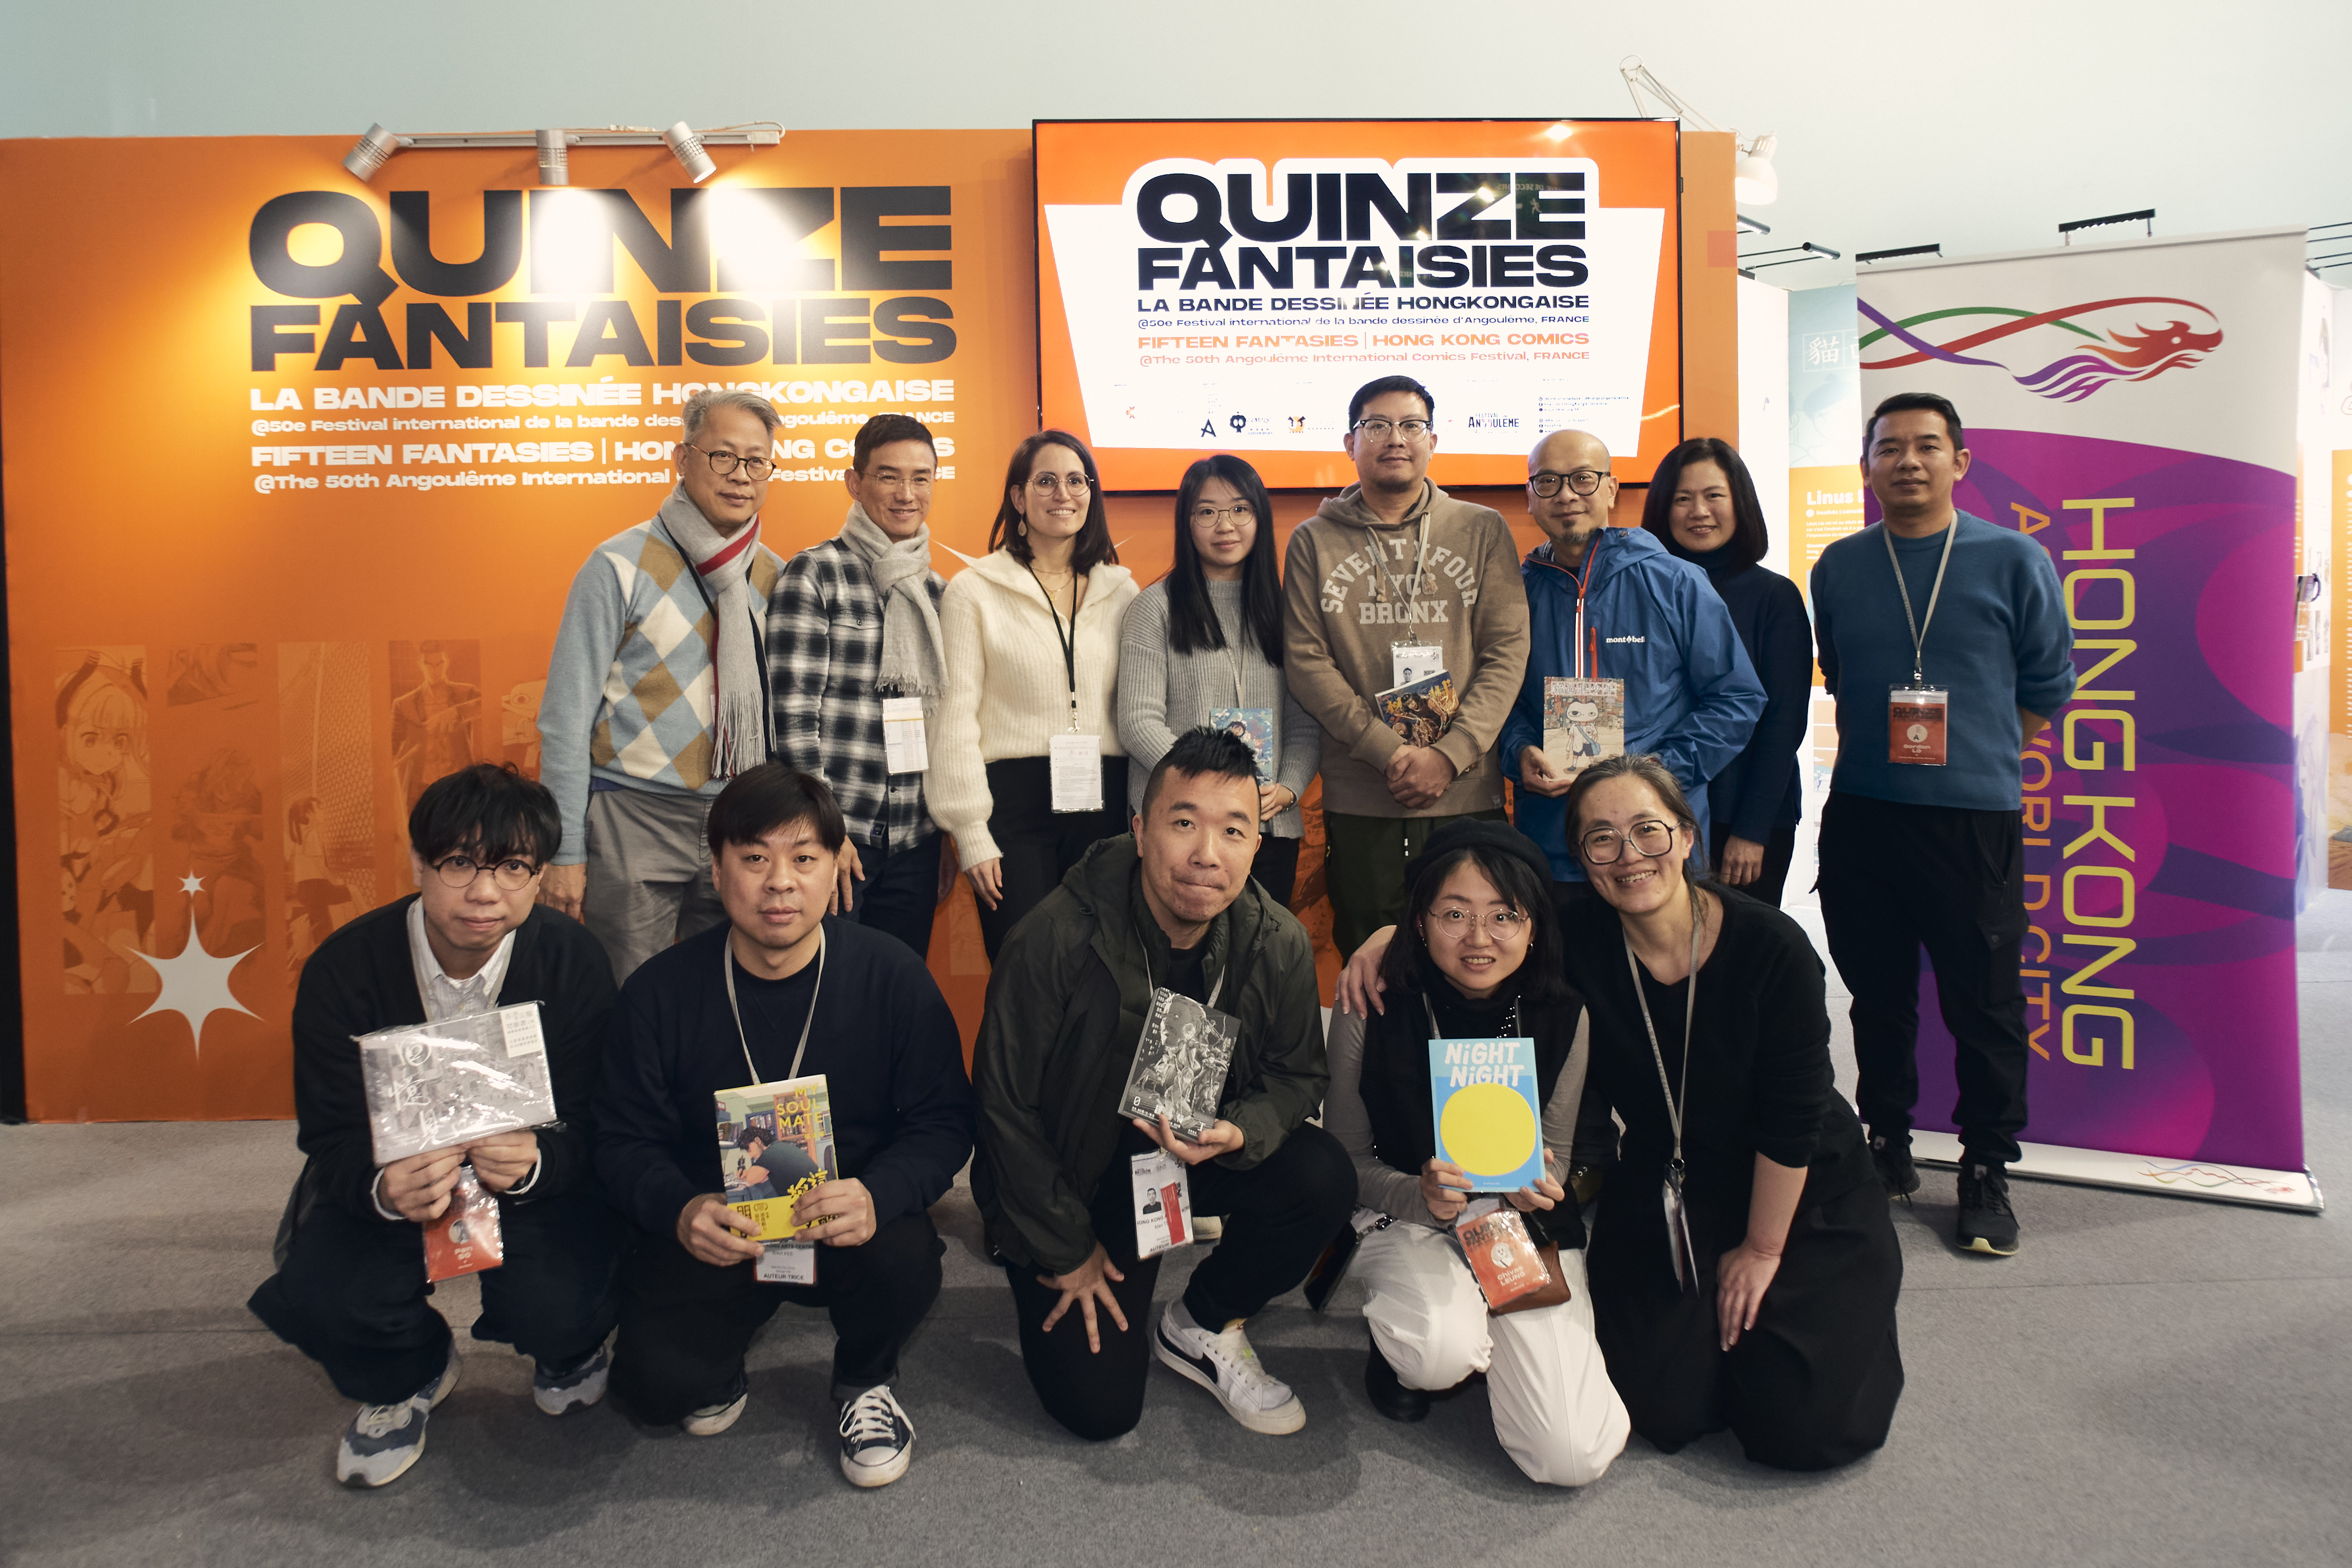 The Angoulême International Comics Festival is celebrating its 50th anniversary in 2023! 7 local artists joined the Festival in France with great support from overseas comics fans.